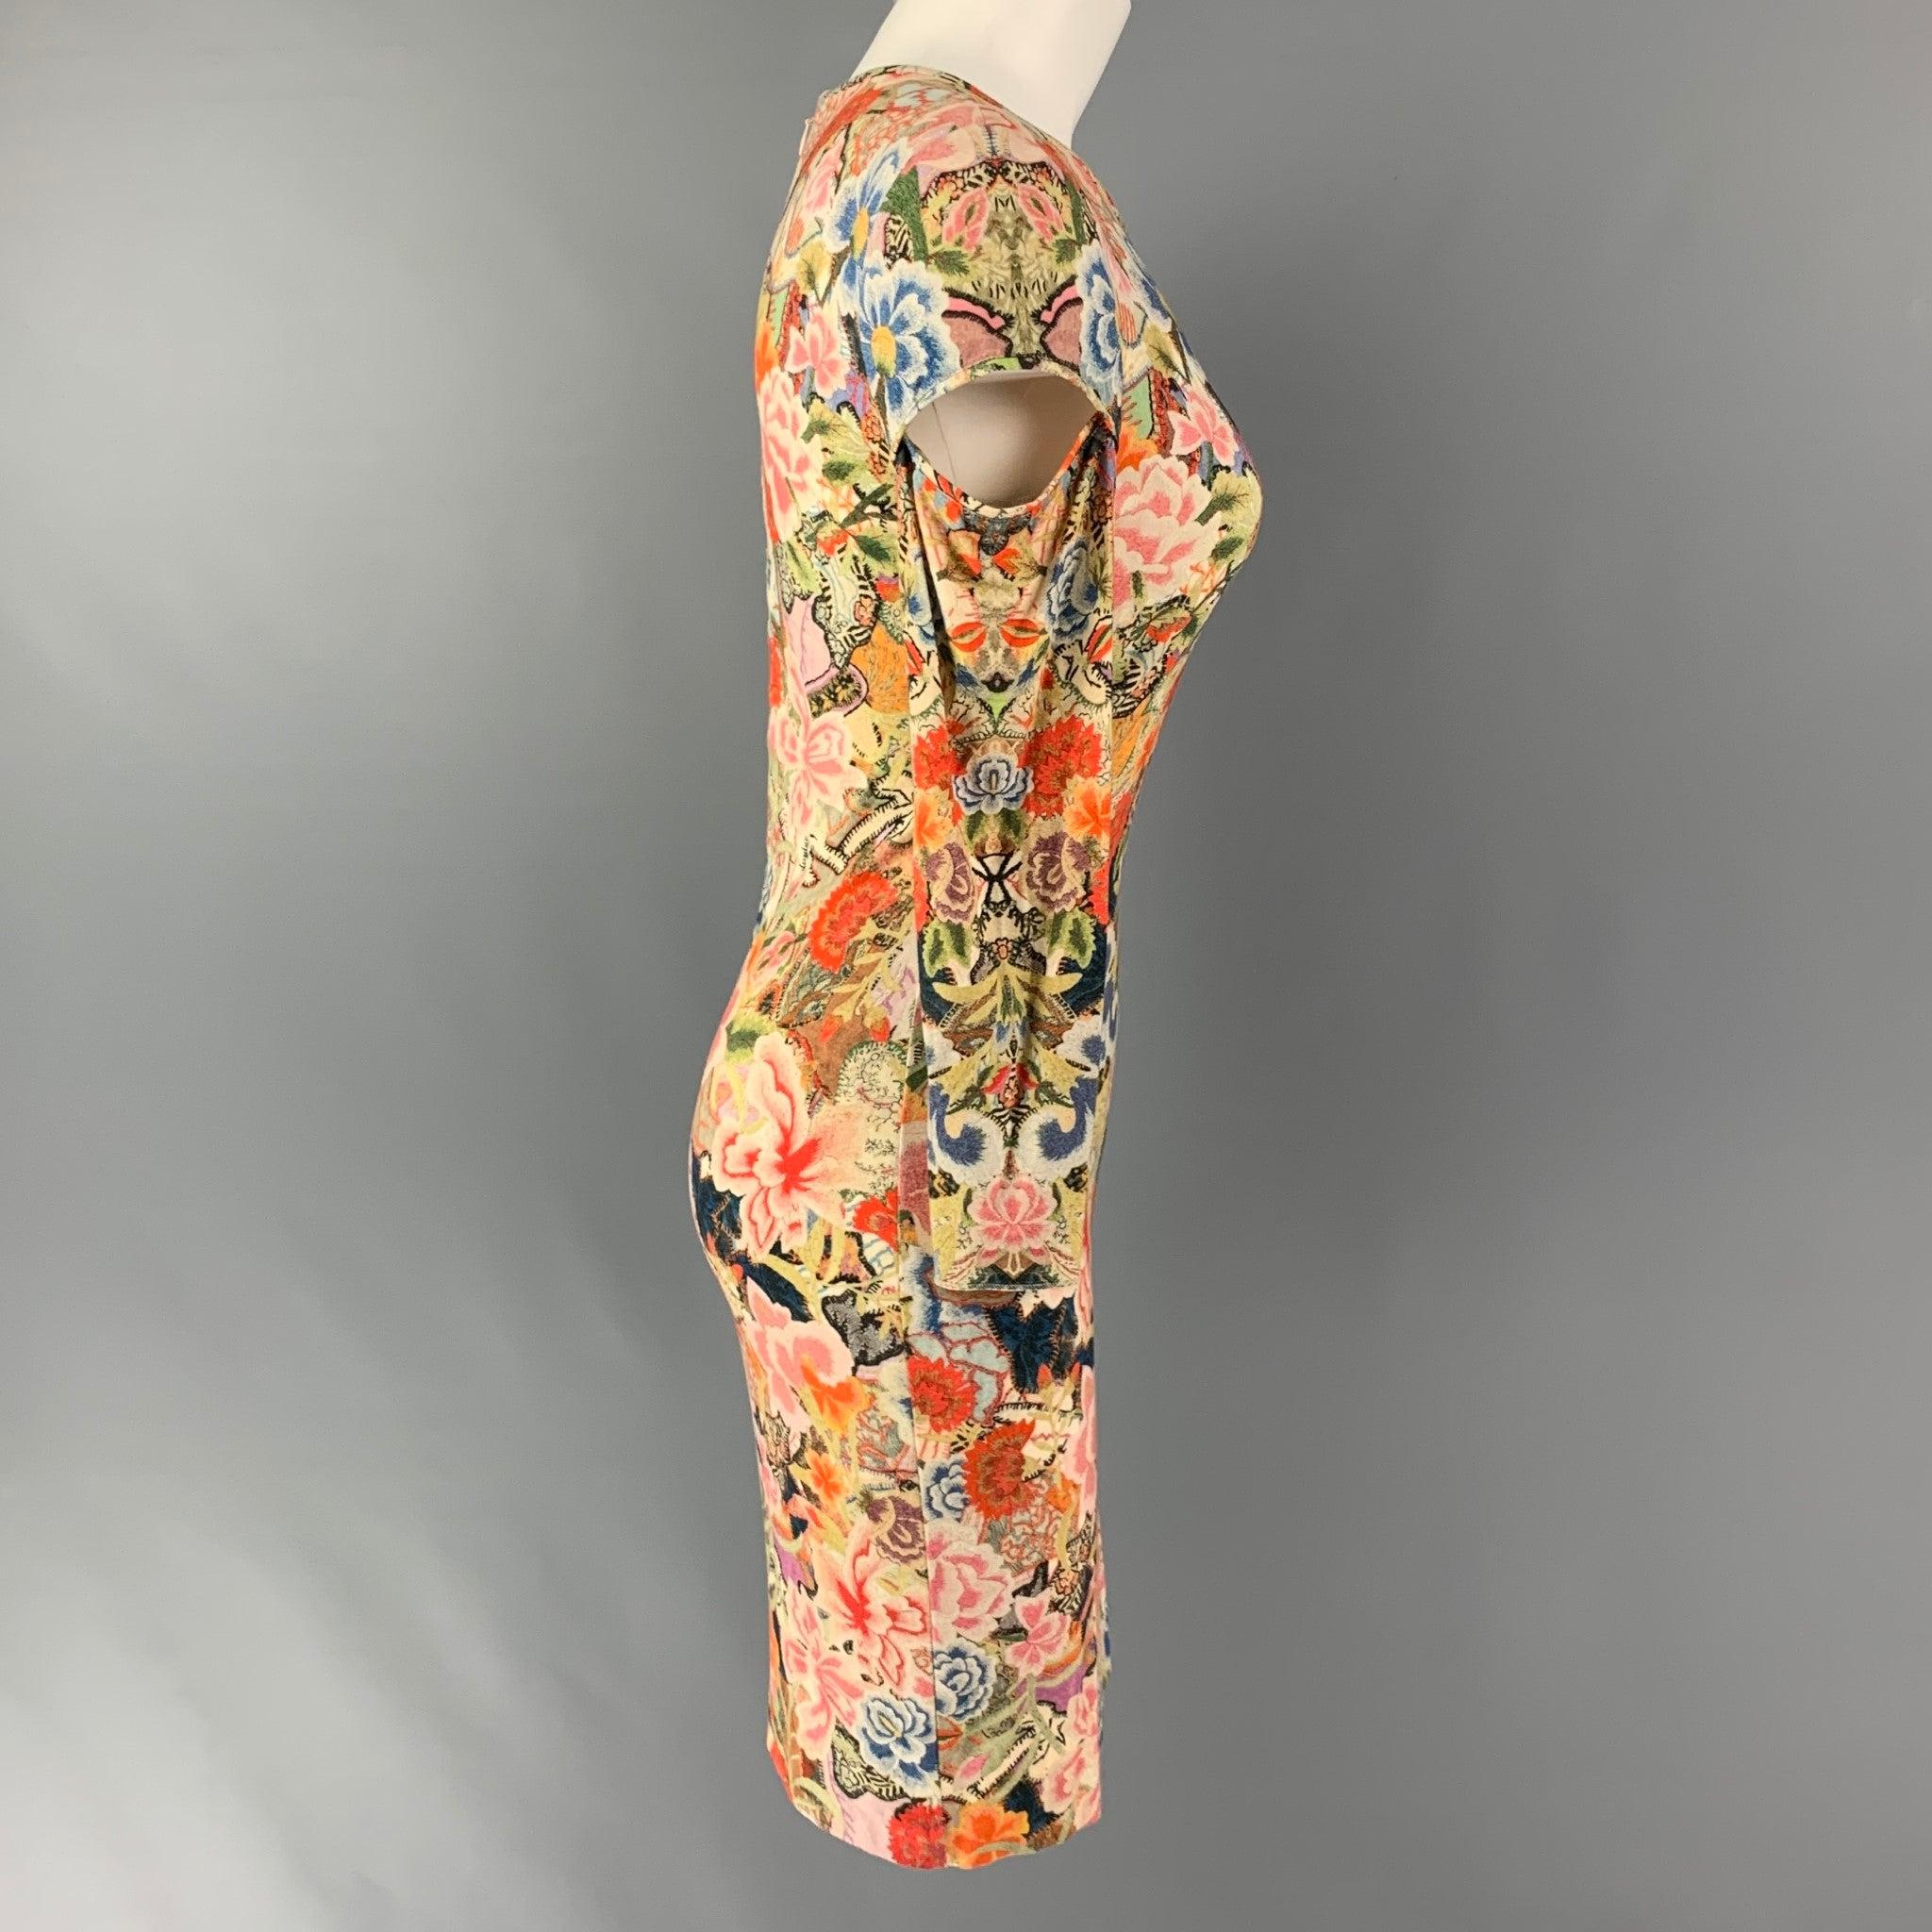 ALEXANDER McQUEEN dress comes in a multi-color abstract floral rayon blend featuring shoulder cut-out details, crew-neck, and a back zip up closure. Made in Italy.Very Good Pre-Owned Condition. 

Marked:  42 

Measurements: 
 
Shoulder: 15.5 inches